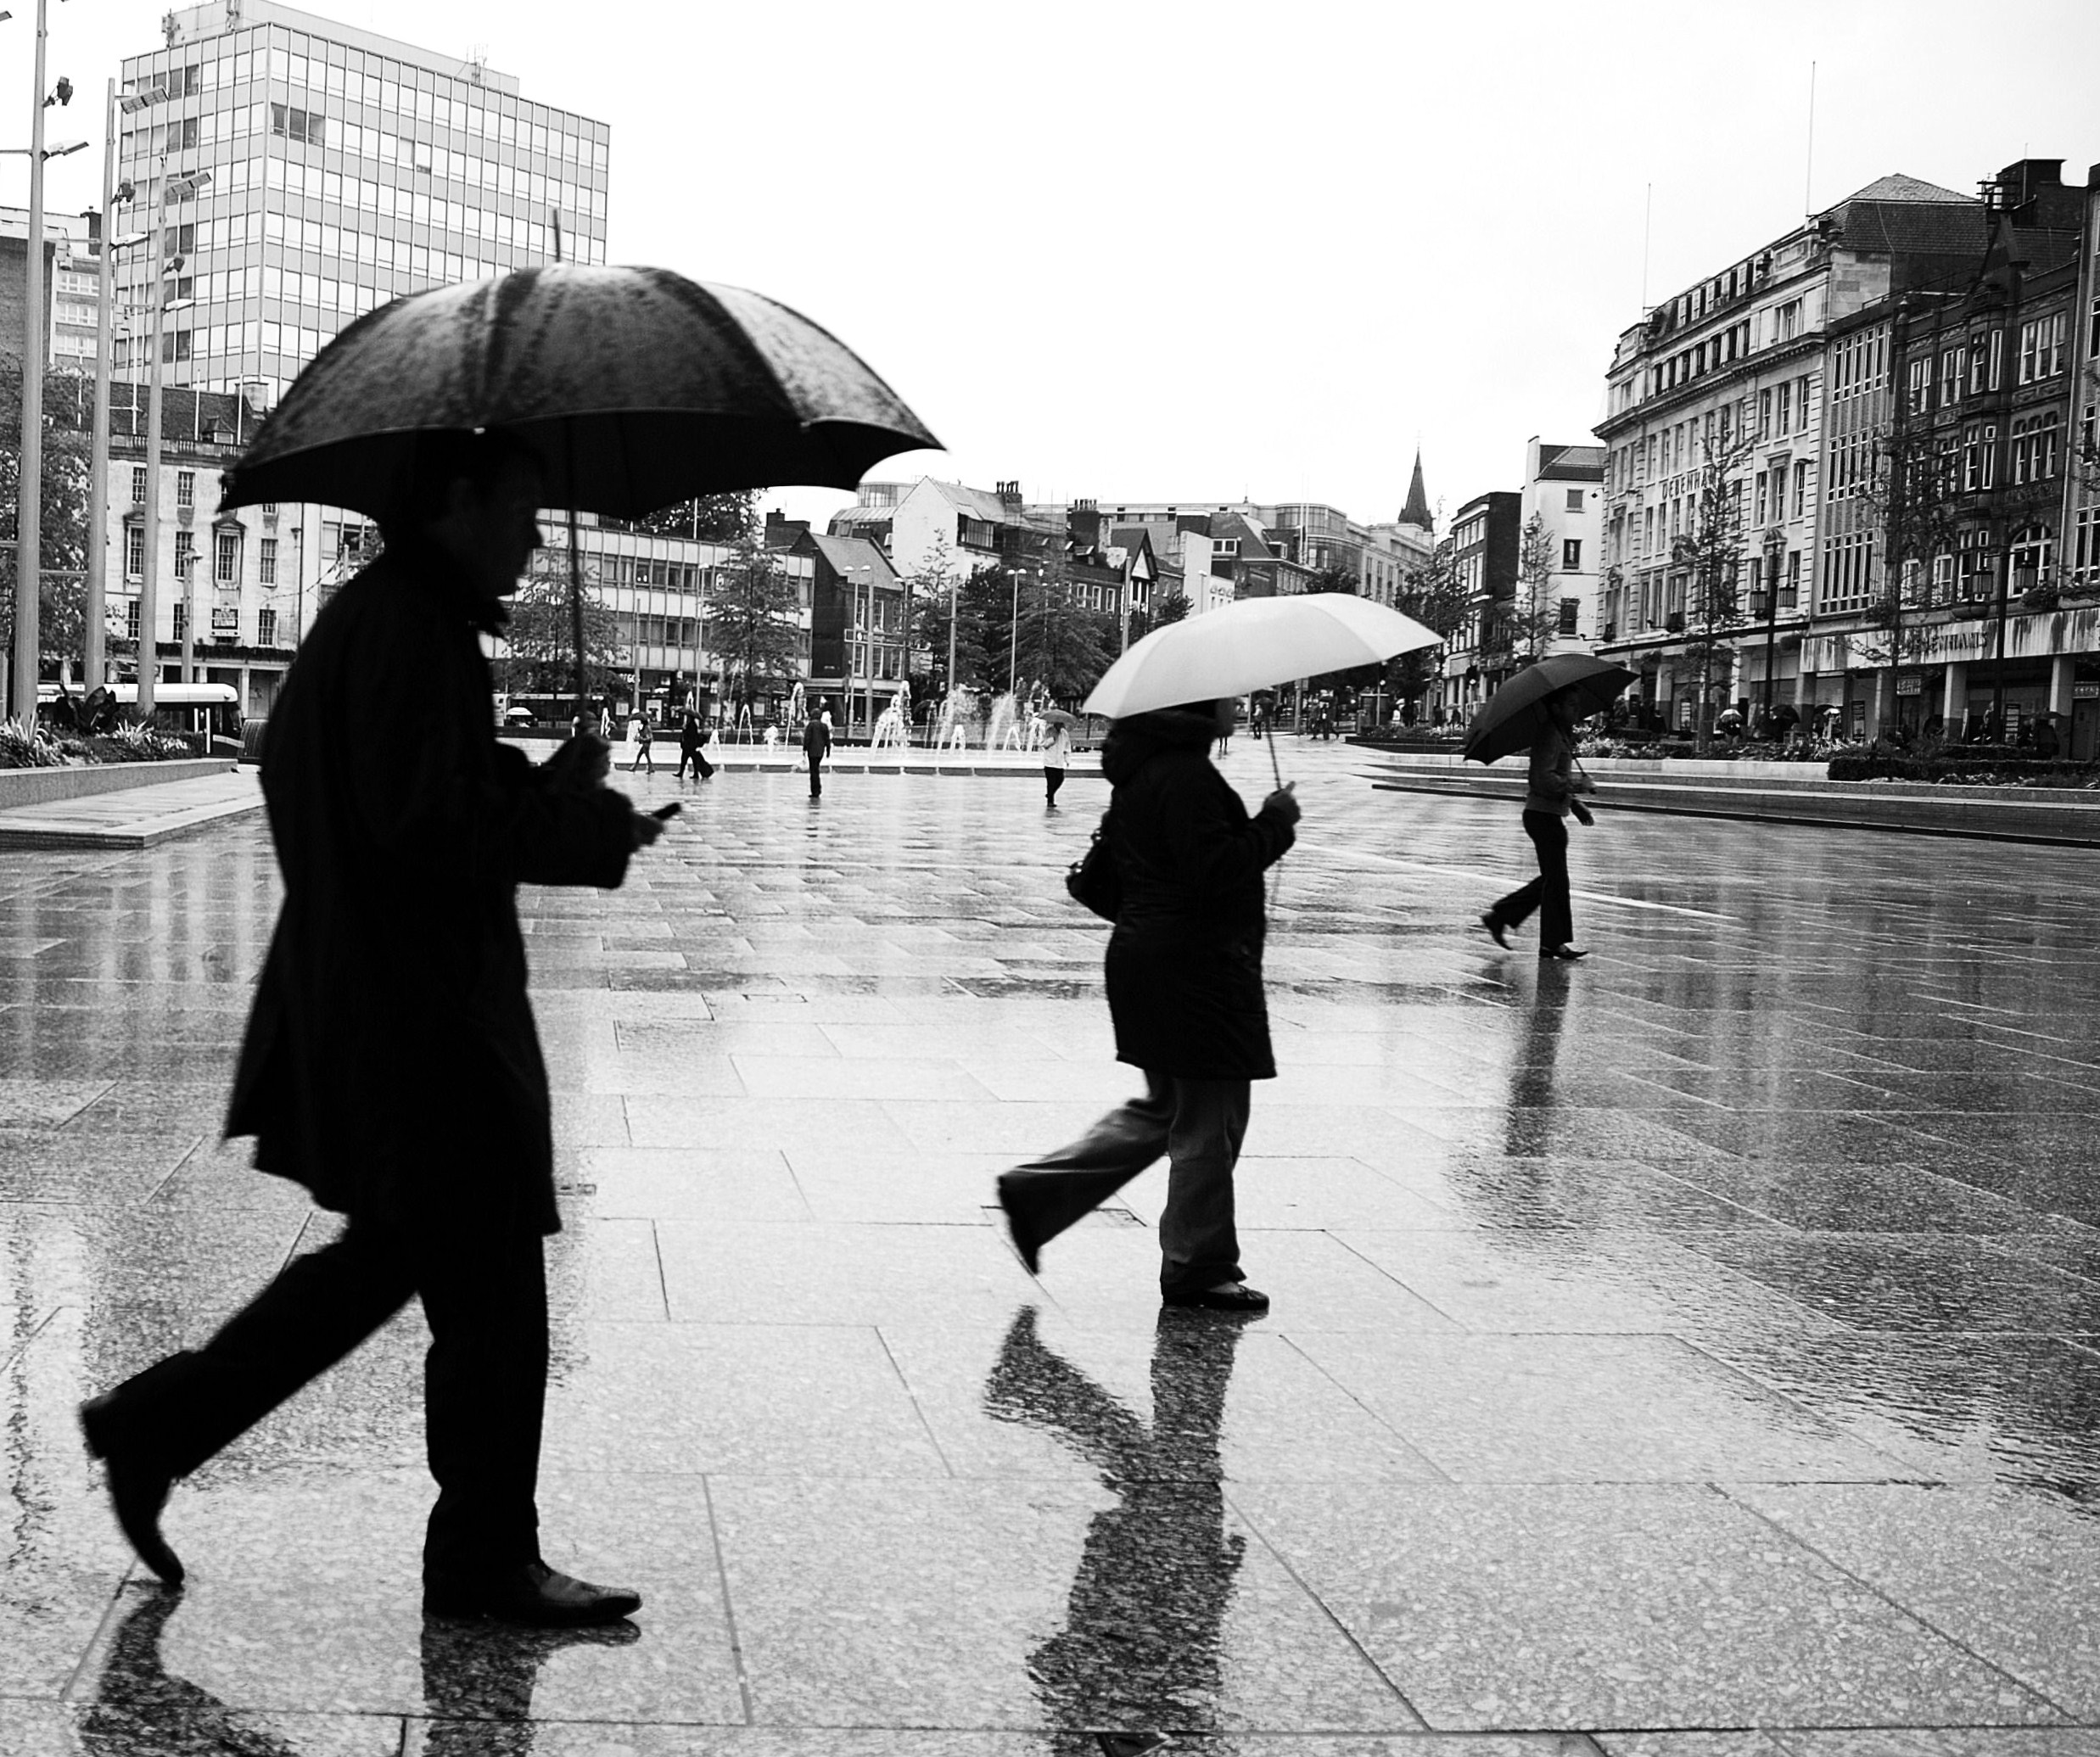 File:People with umbrellas in the United Kingdom.jpg - Wikimedia Commons